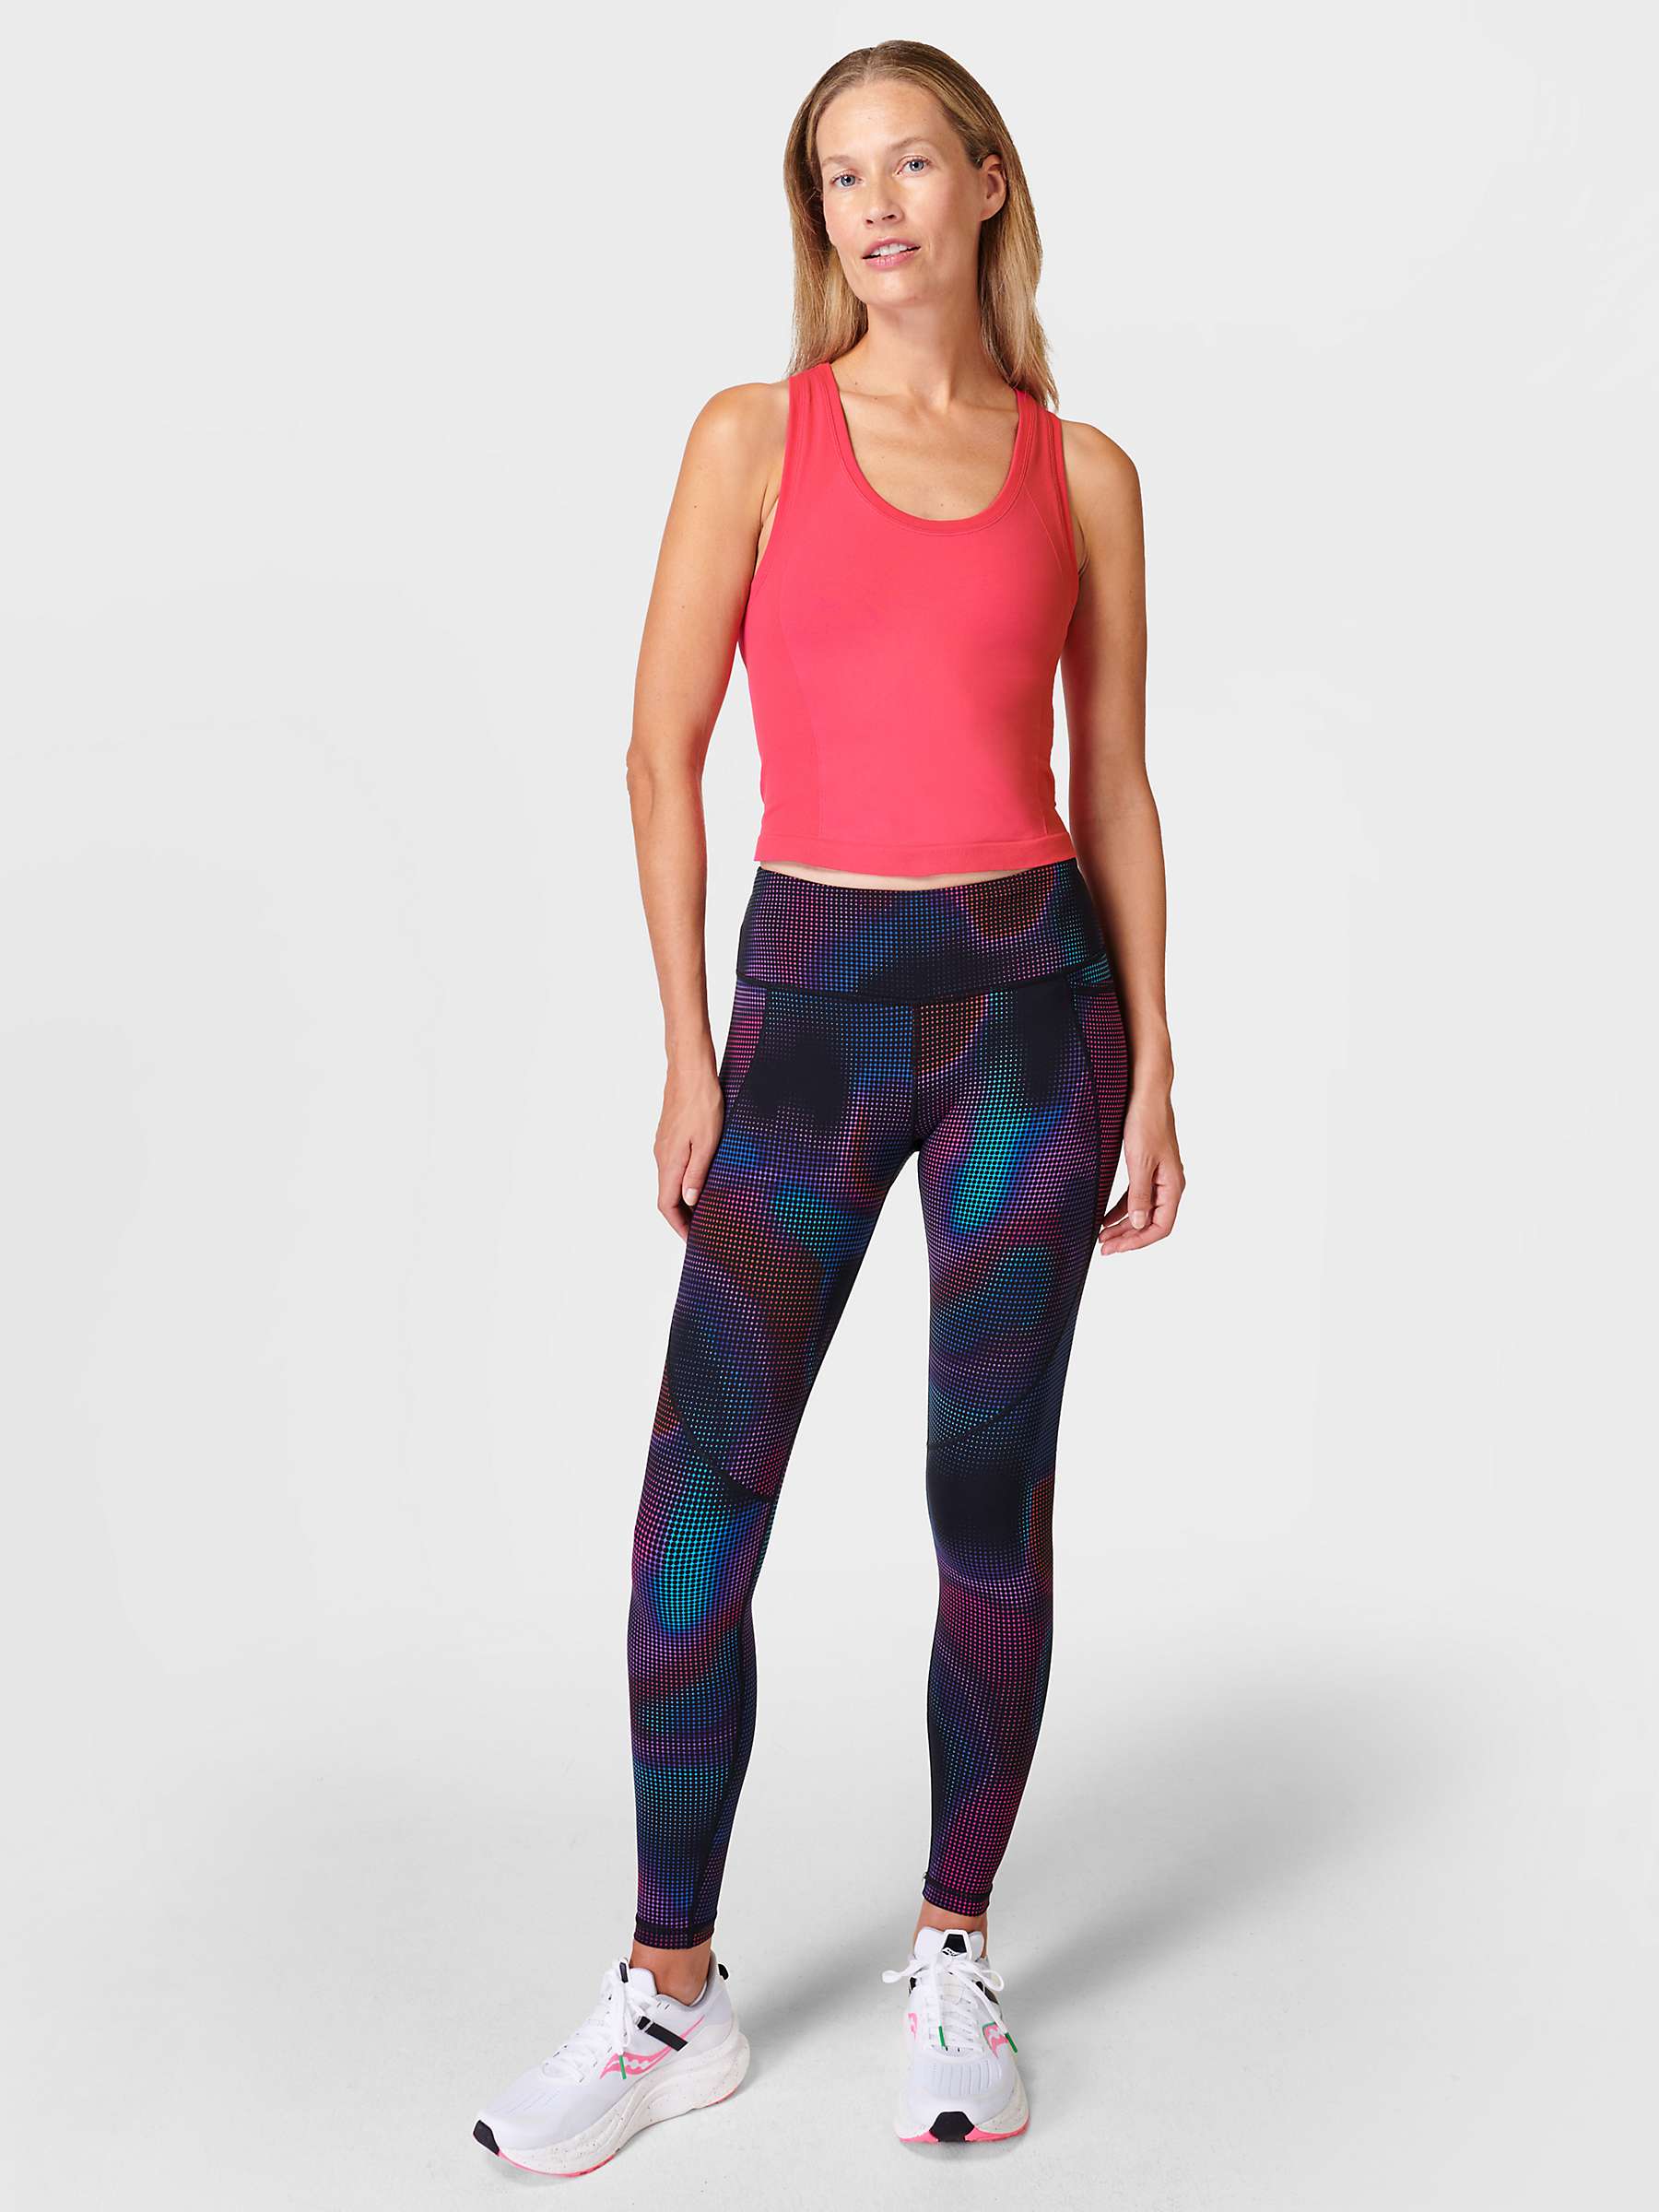 Buy Sweaty Betty Athlete Crop Seamless Workout Tank Top Online at johnlewis.com